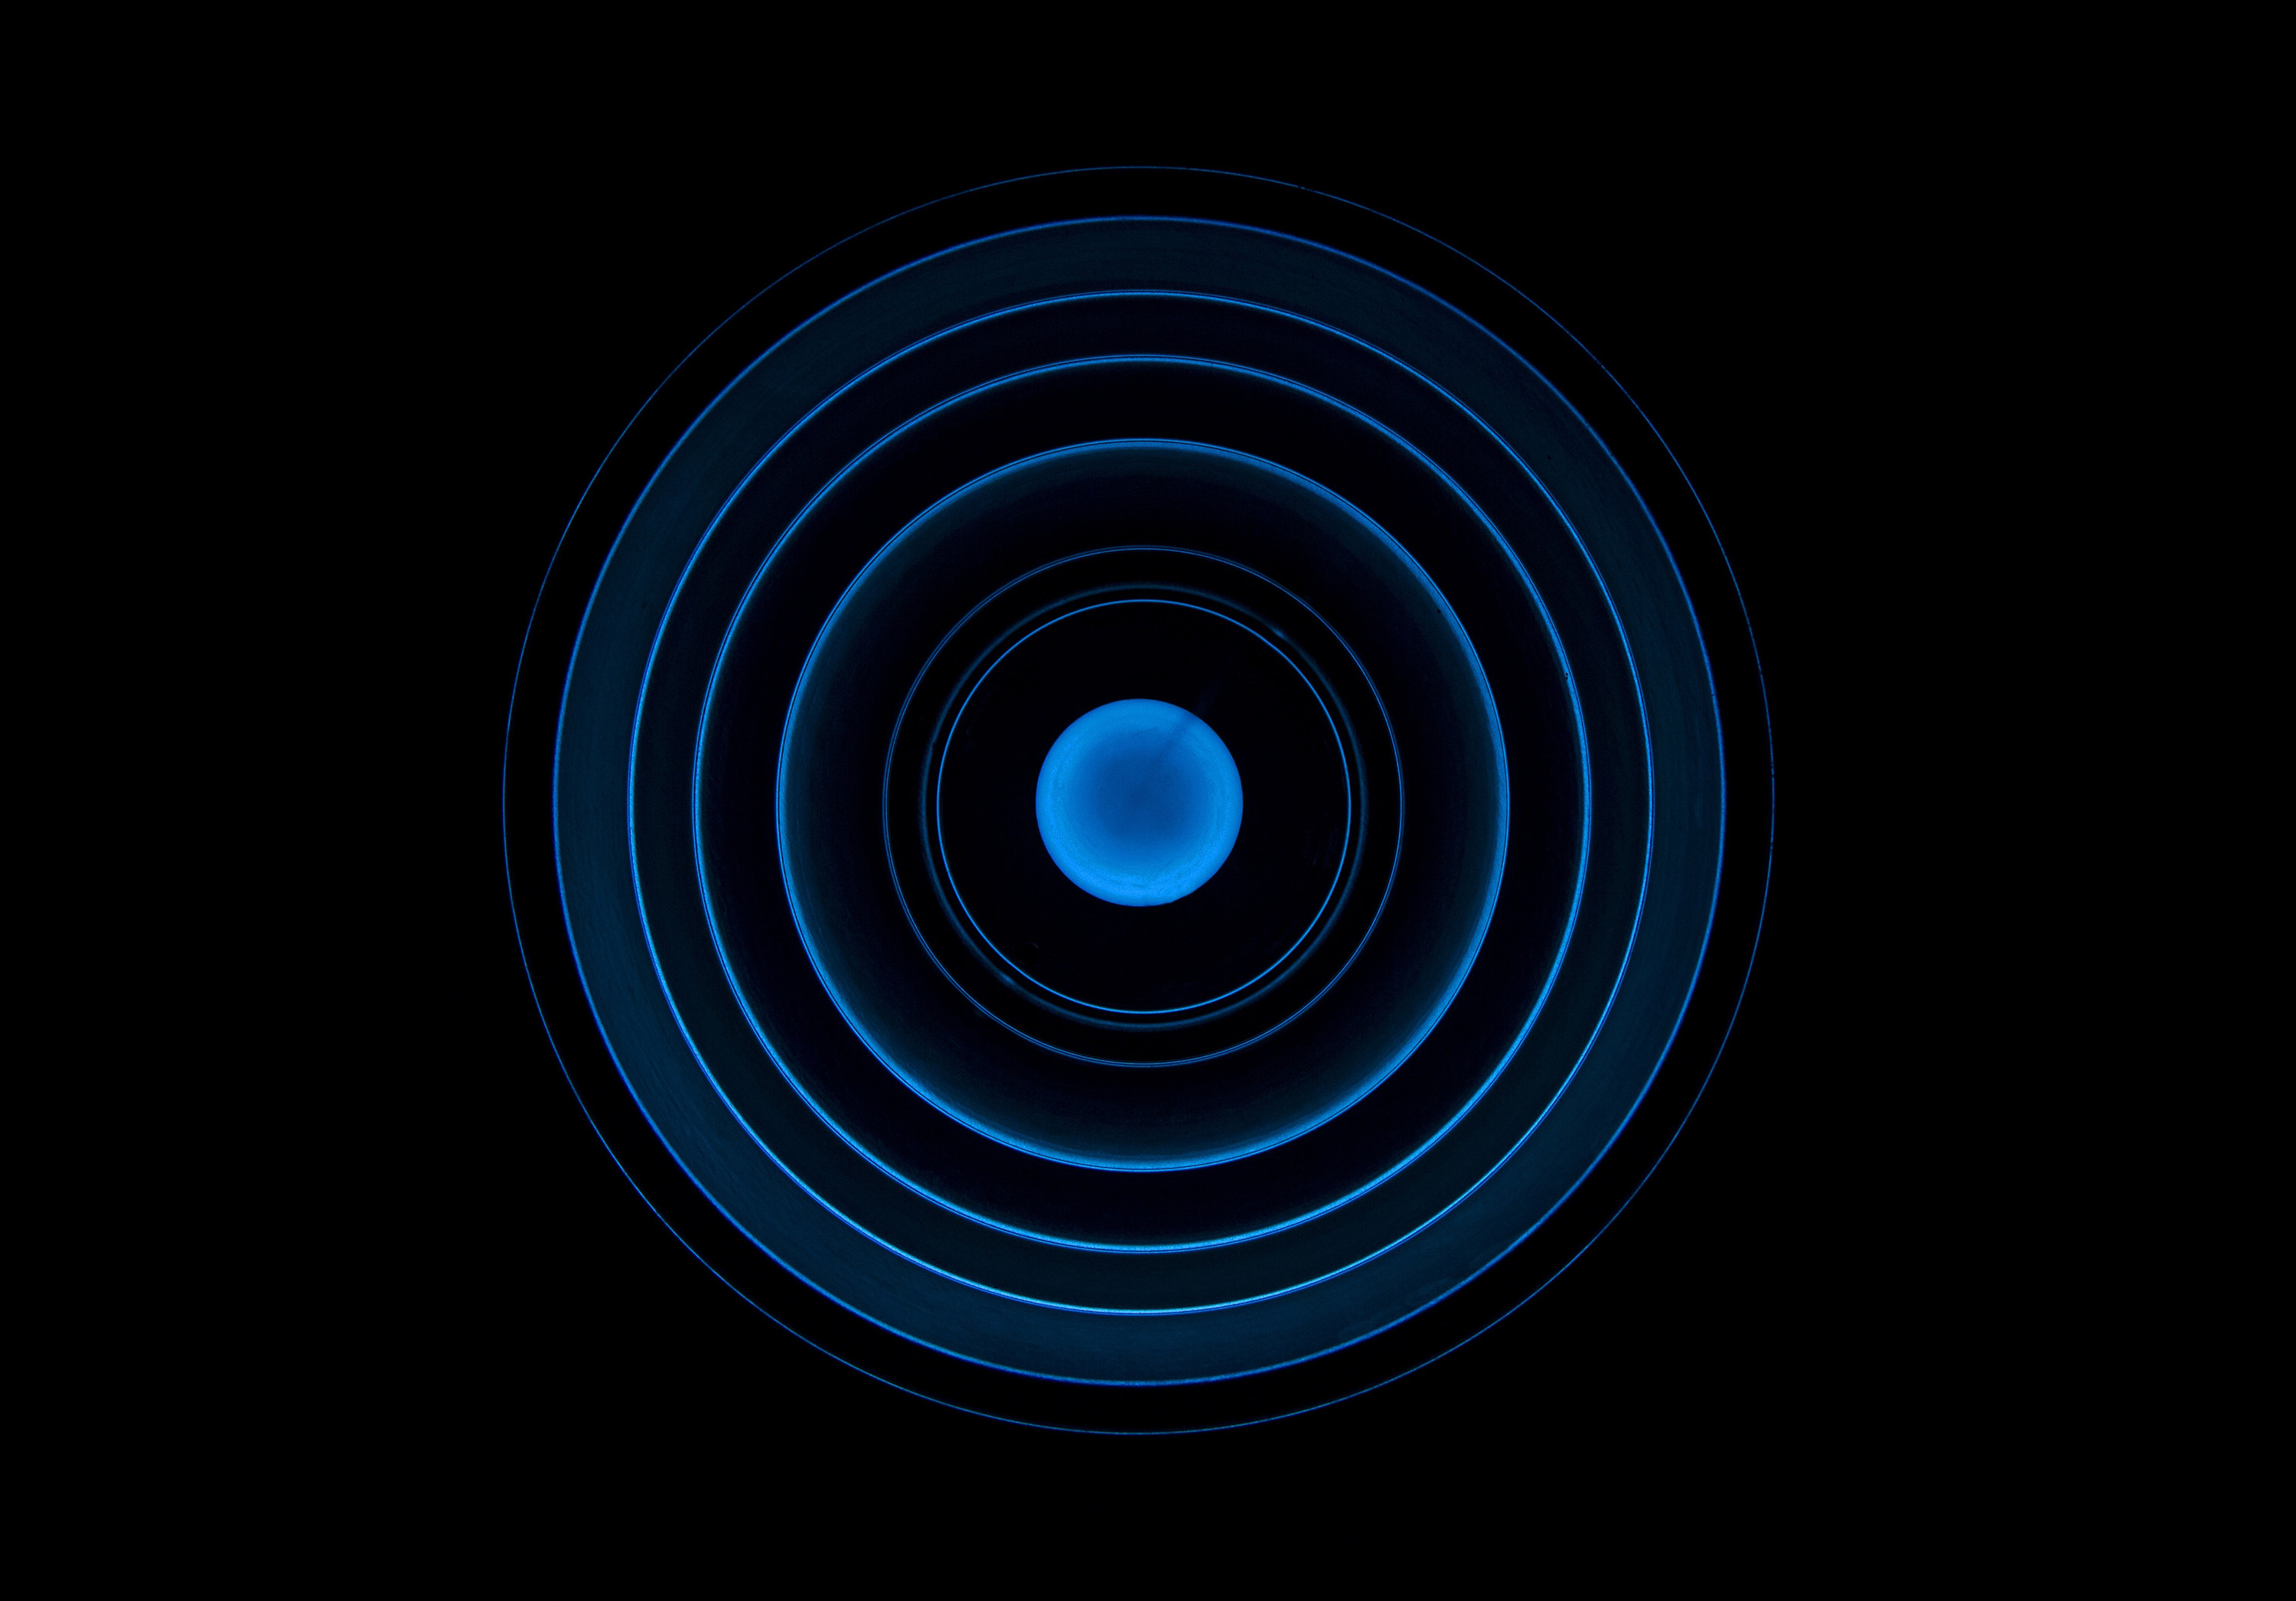 A hypnotic image with a bright blue sphere at the center, surrounded by glowing blue rings against a black background. It’s abstract and radiant.